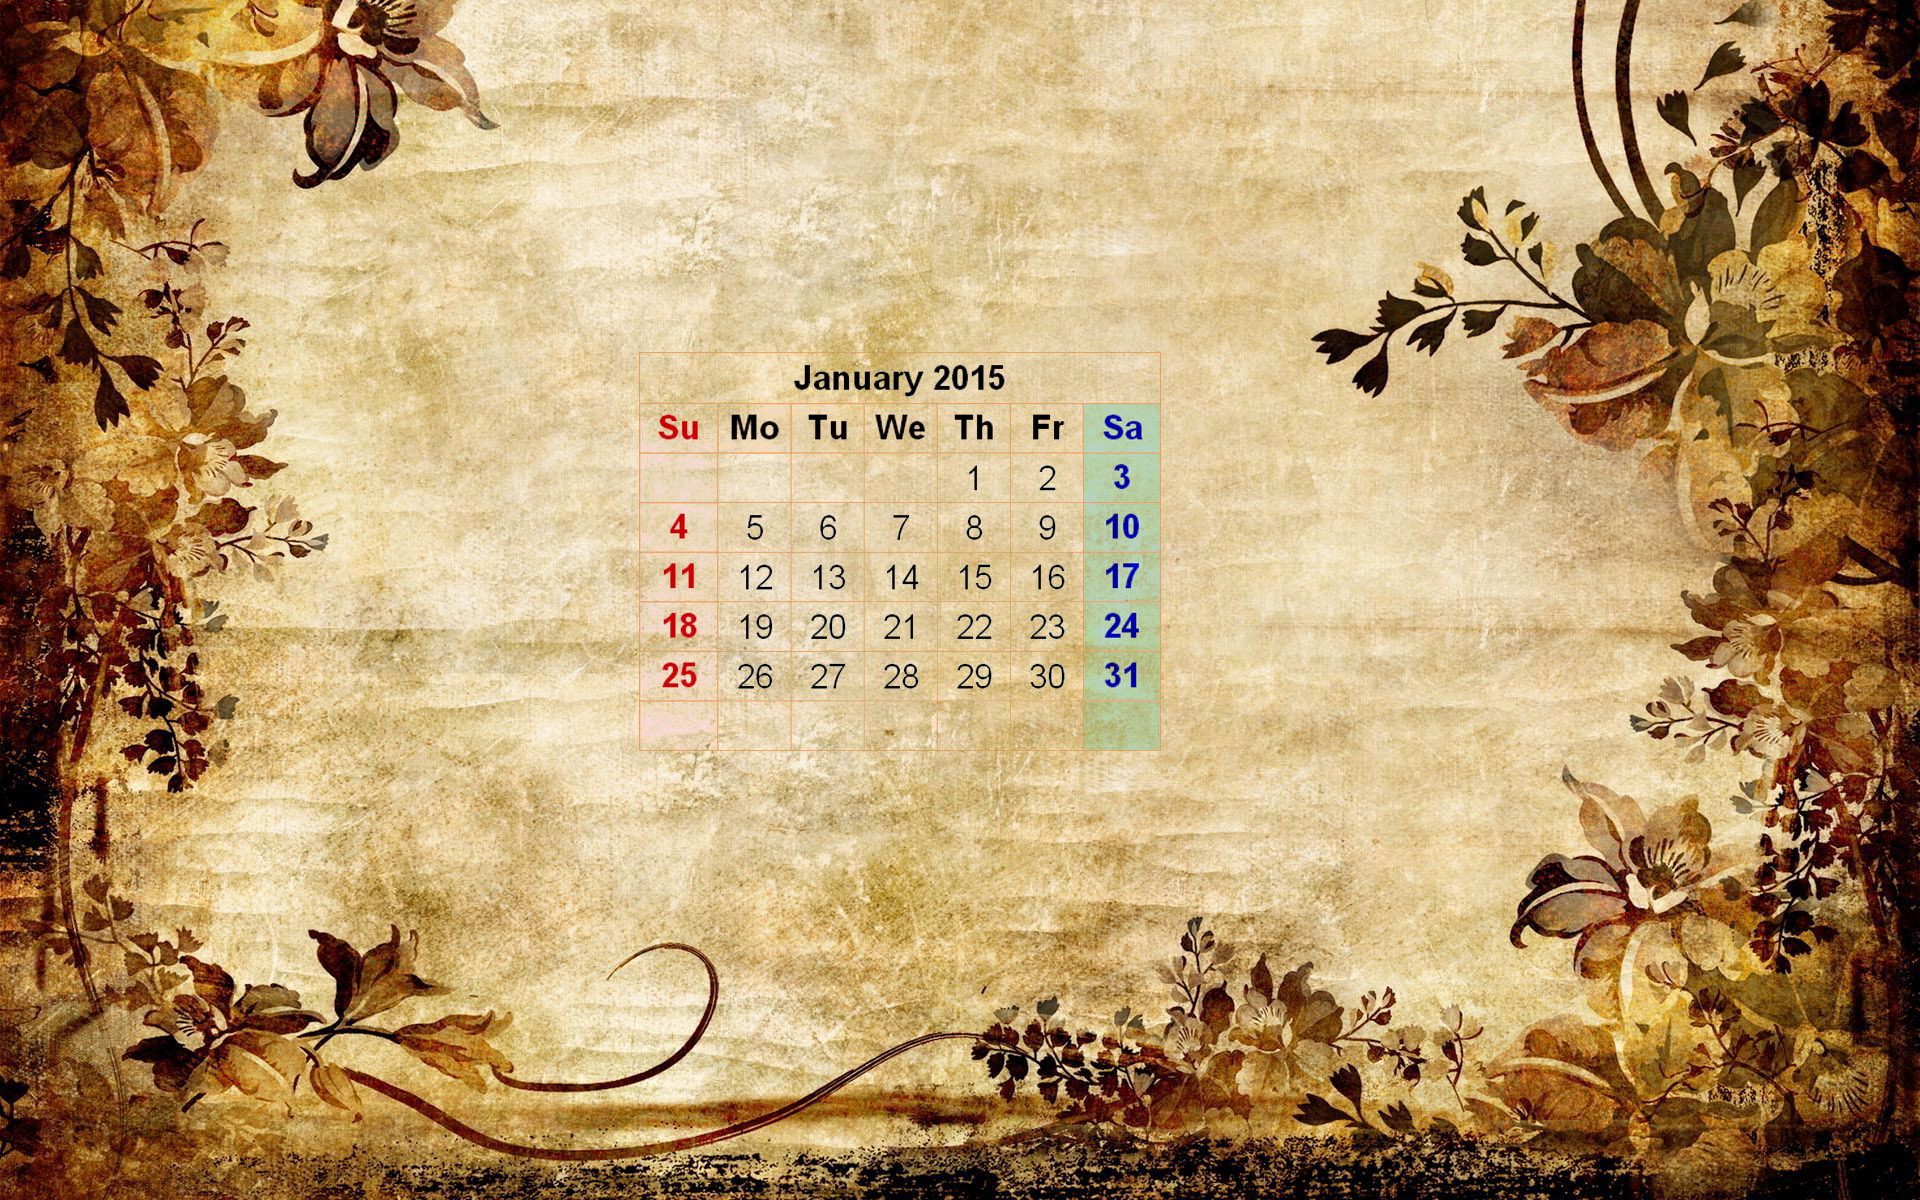 January 2015 Calendar Images and Wallpapers Happy Holidays 2014 1920x1200